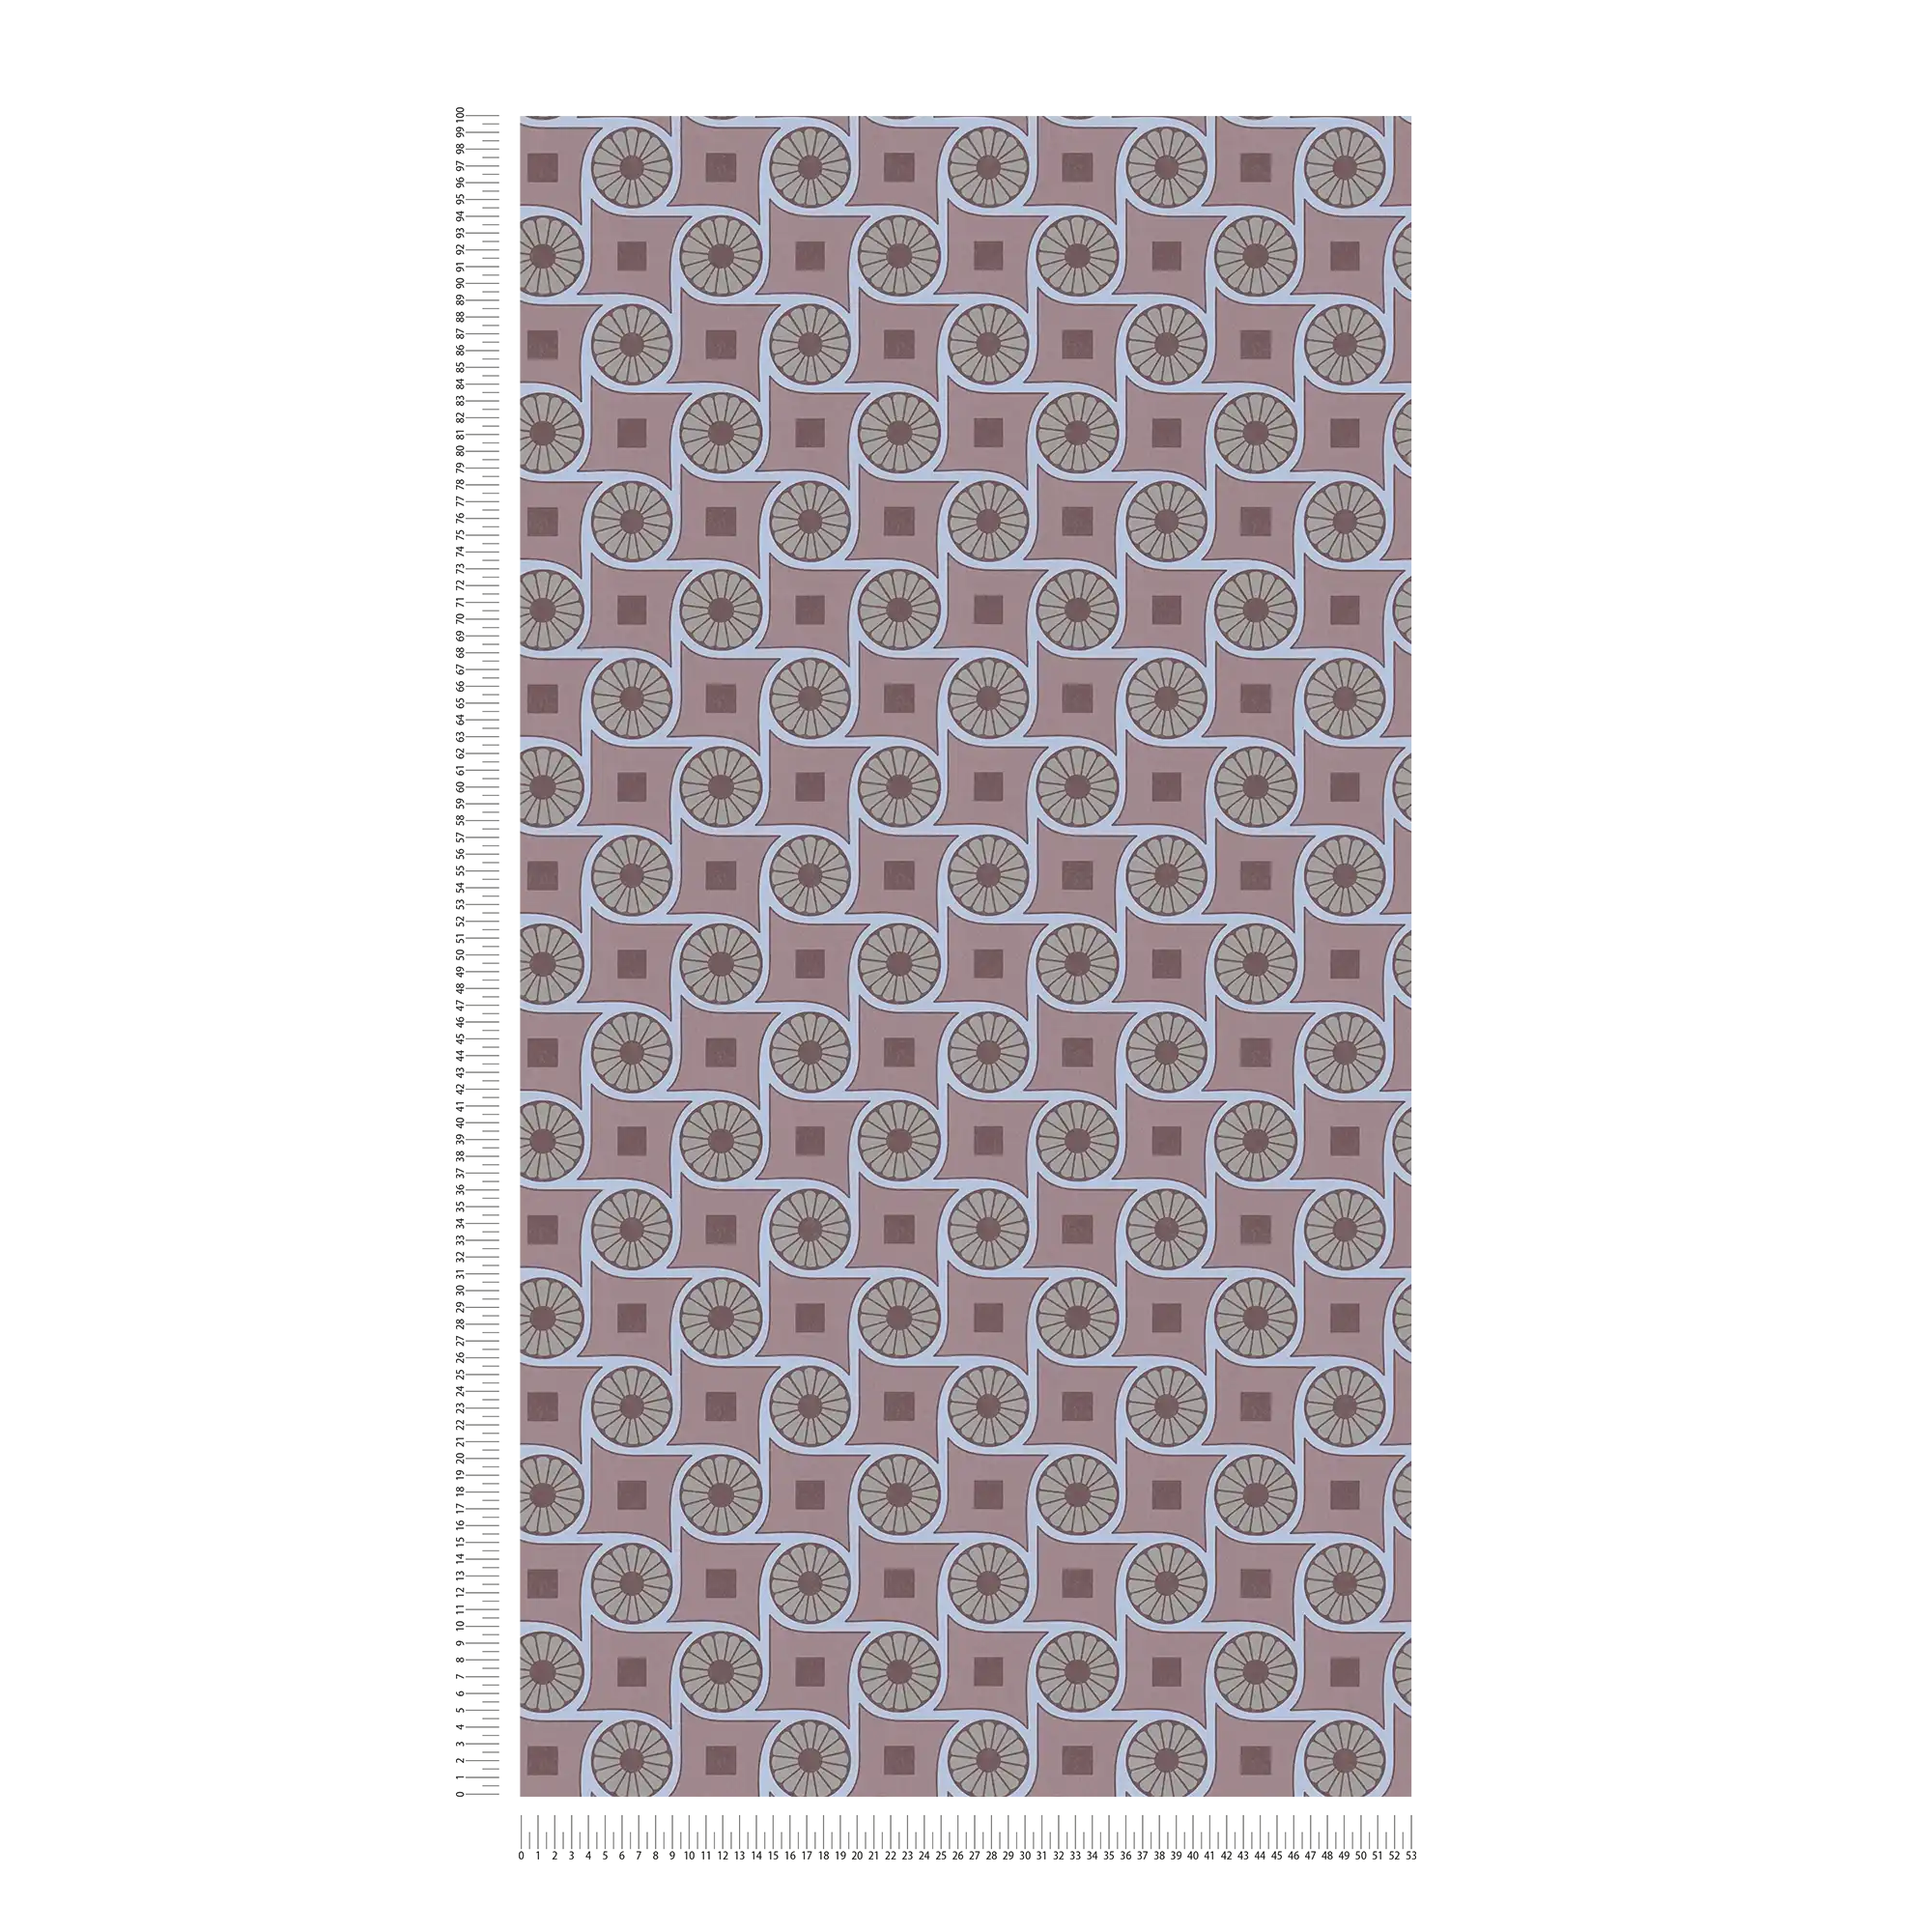             Retro wallpaper with circle pattern and squares - taupe, blue, grey
        